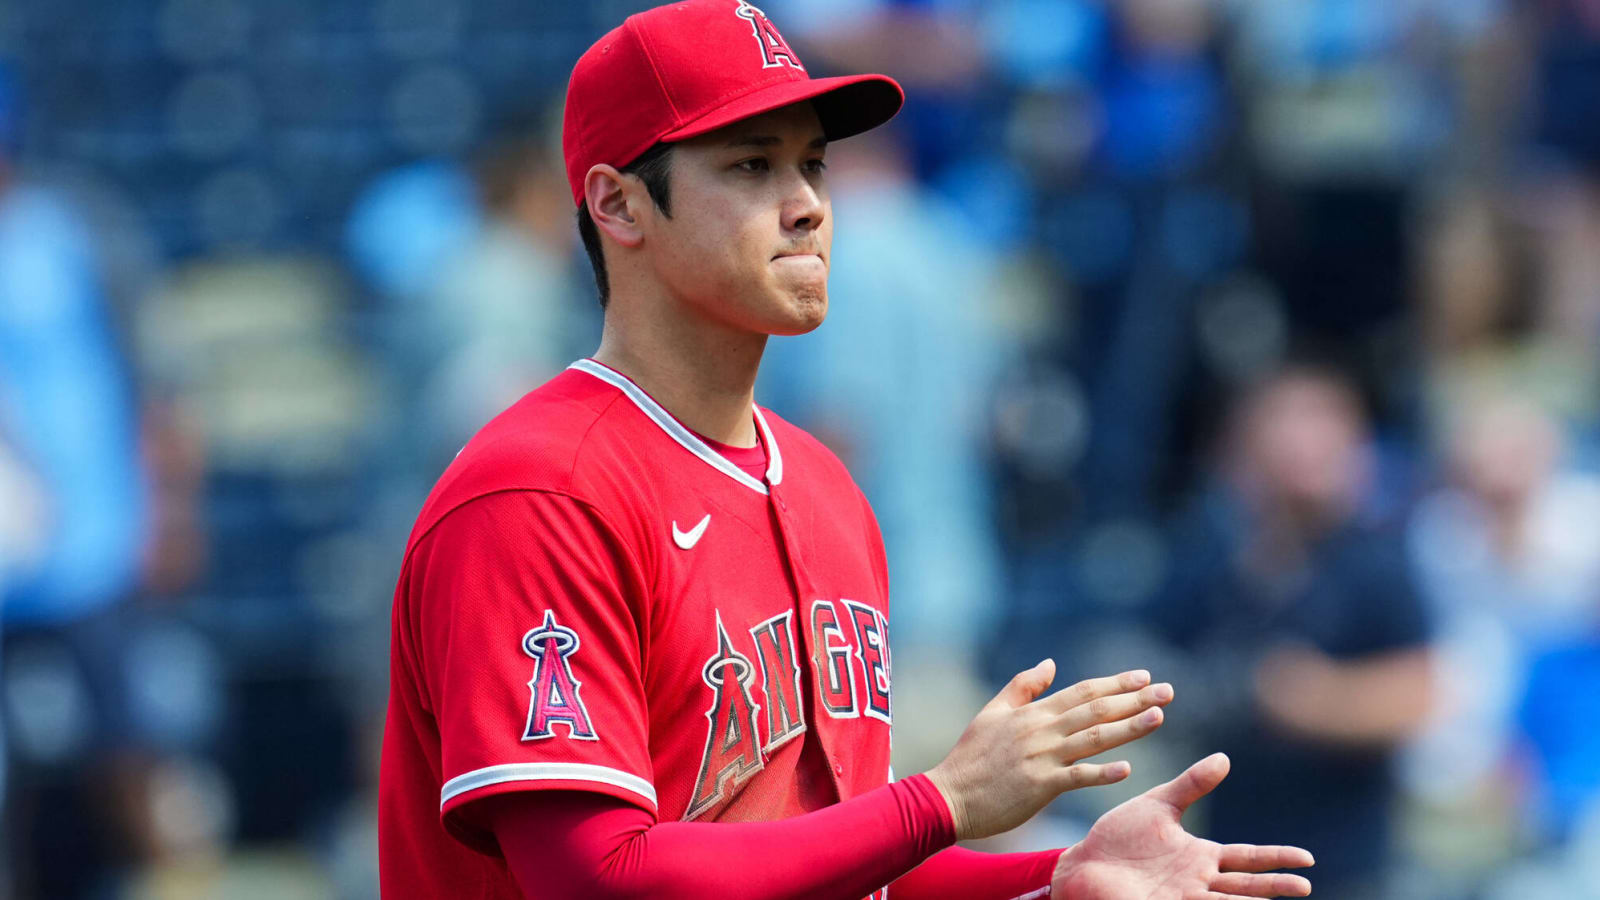 Shohei Ohtani has telling quote about future with Angels